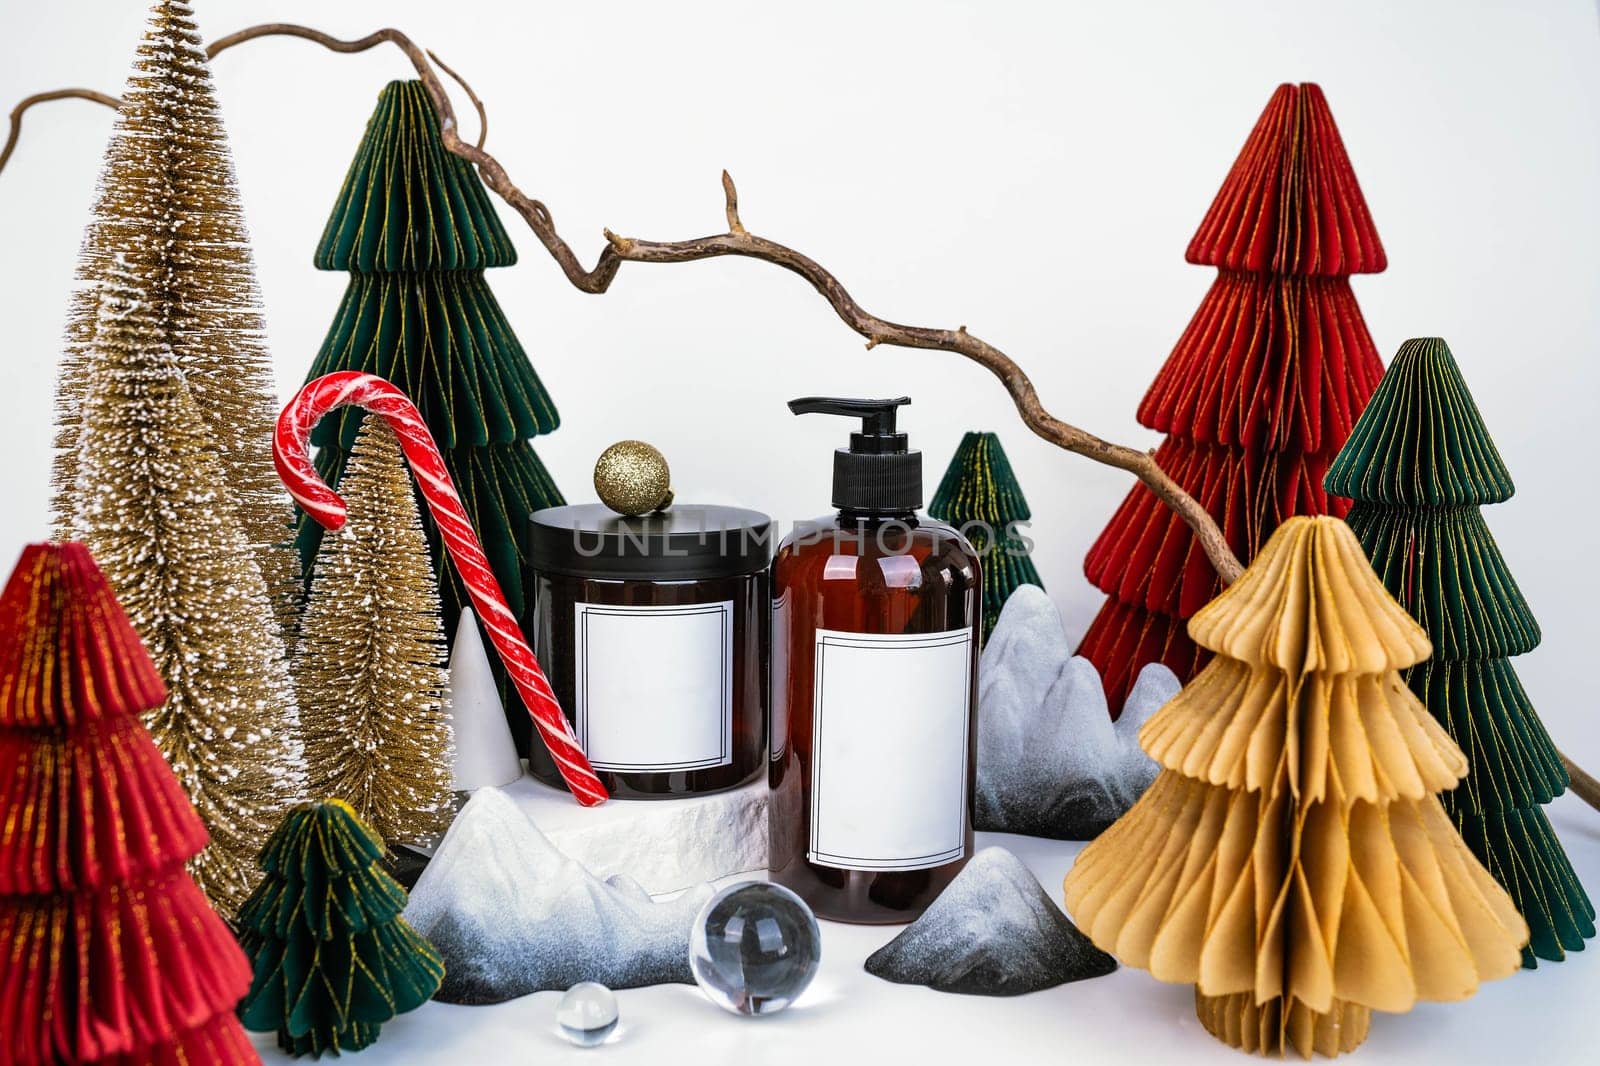 dark jar with lid and dispenser on the background of Christmas decorations